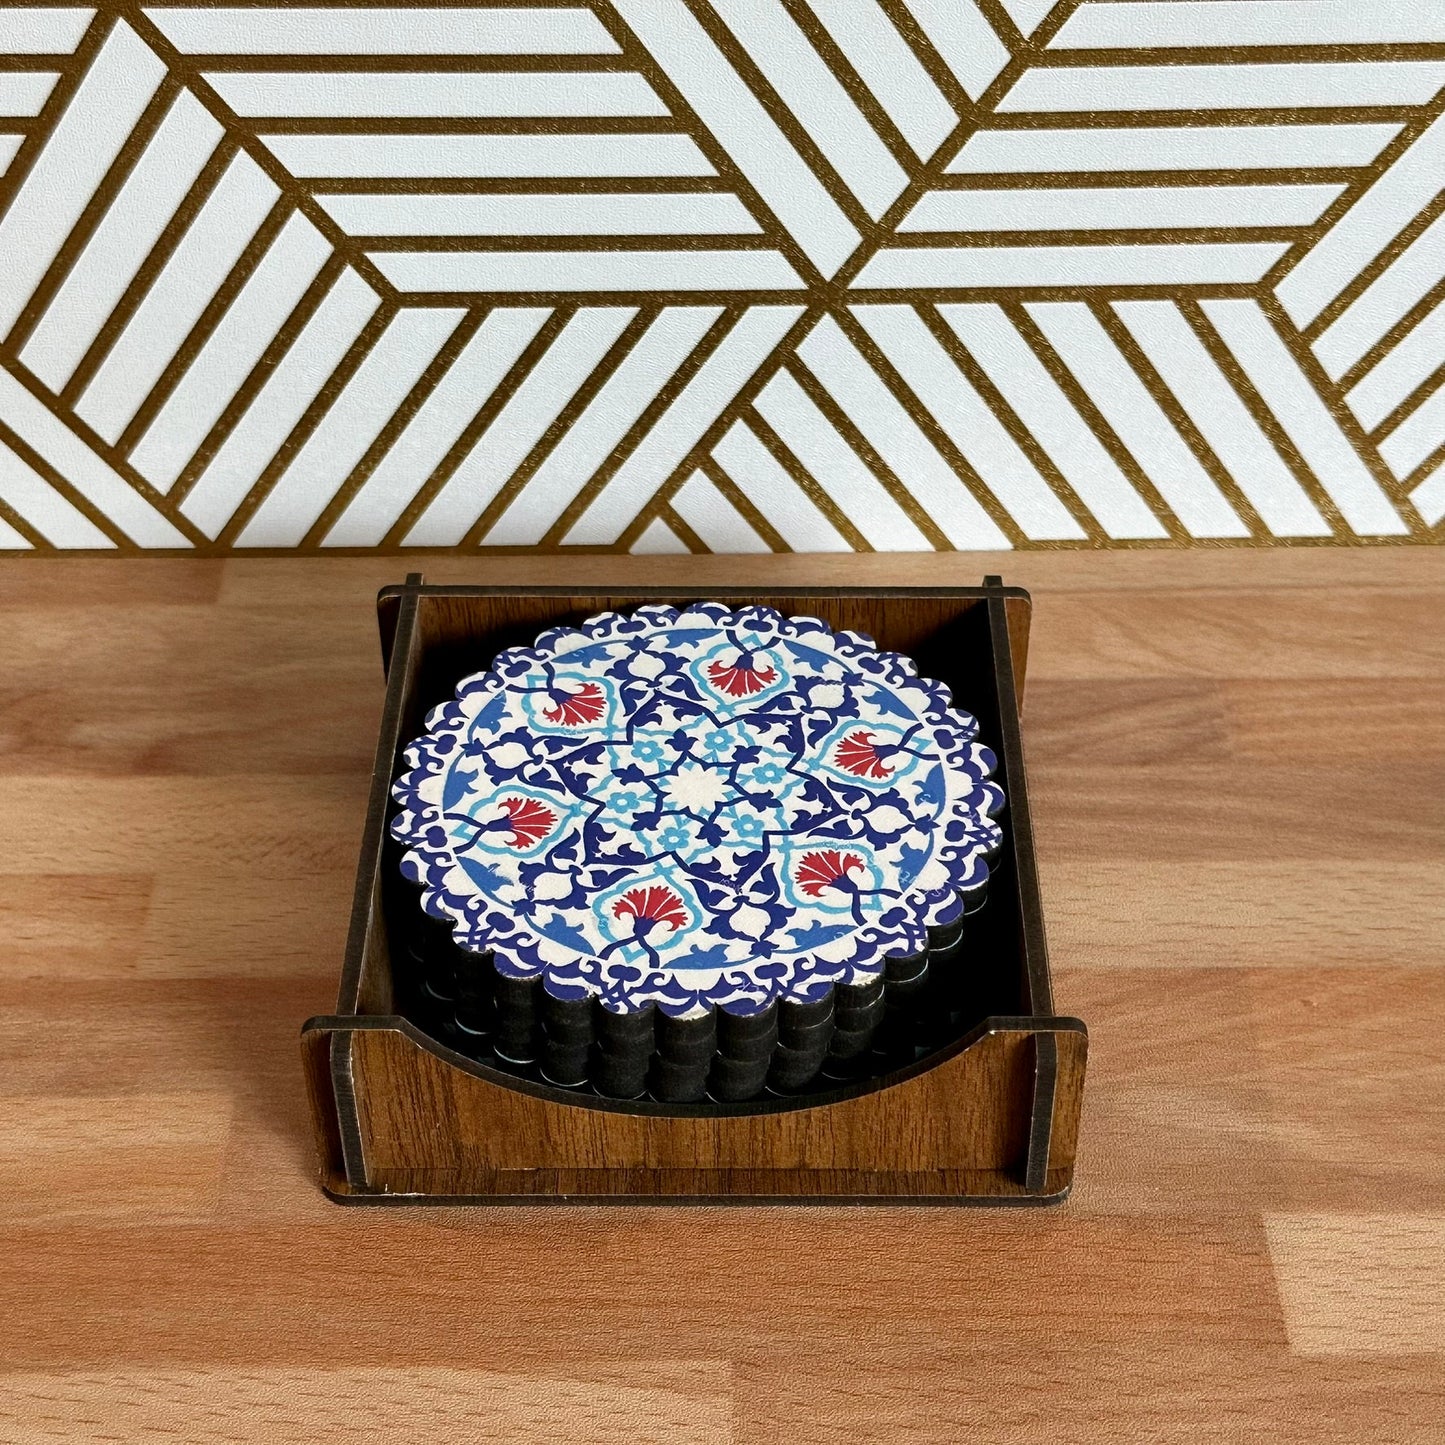 6 Pack Turkish Wooden Coaster Set with Holder - Blue and Red Floral Mandala -- Made in Turkey -- Quick Ship